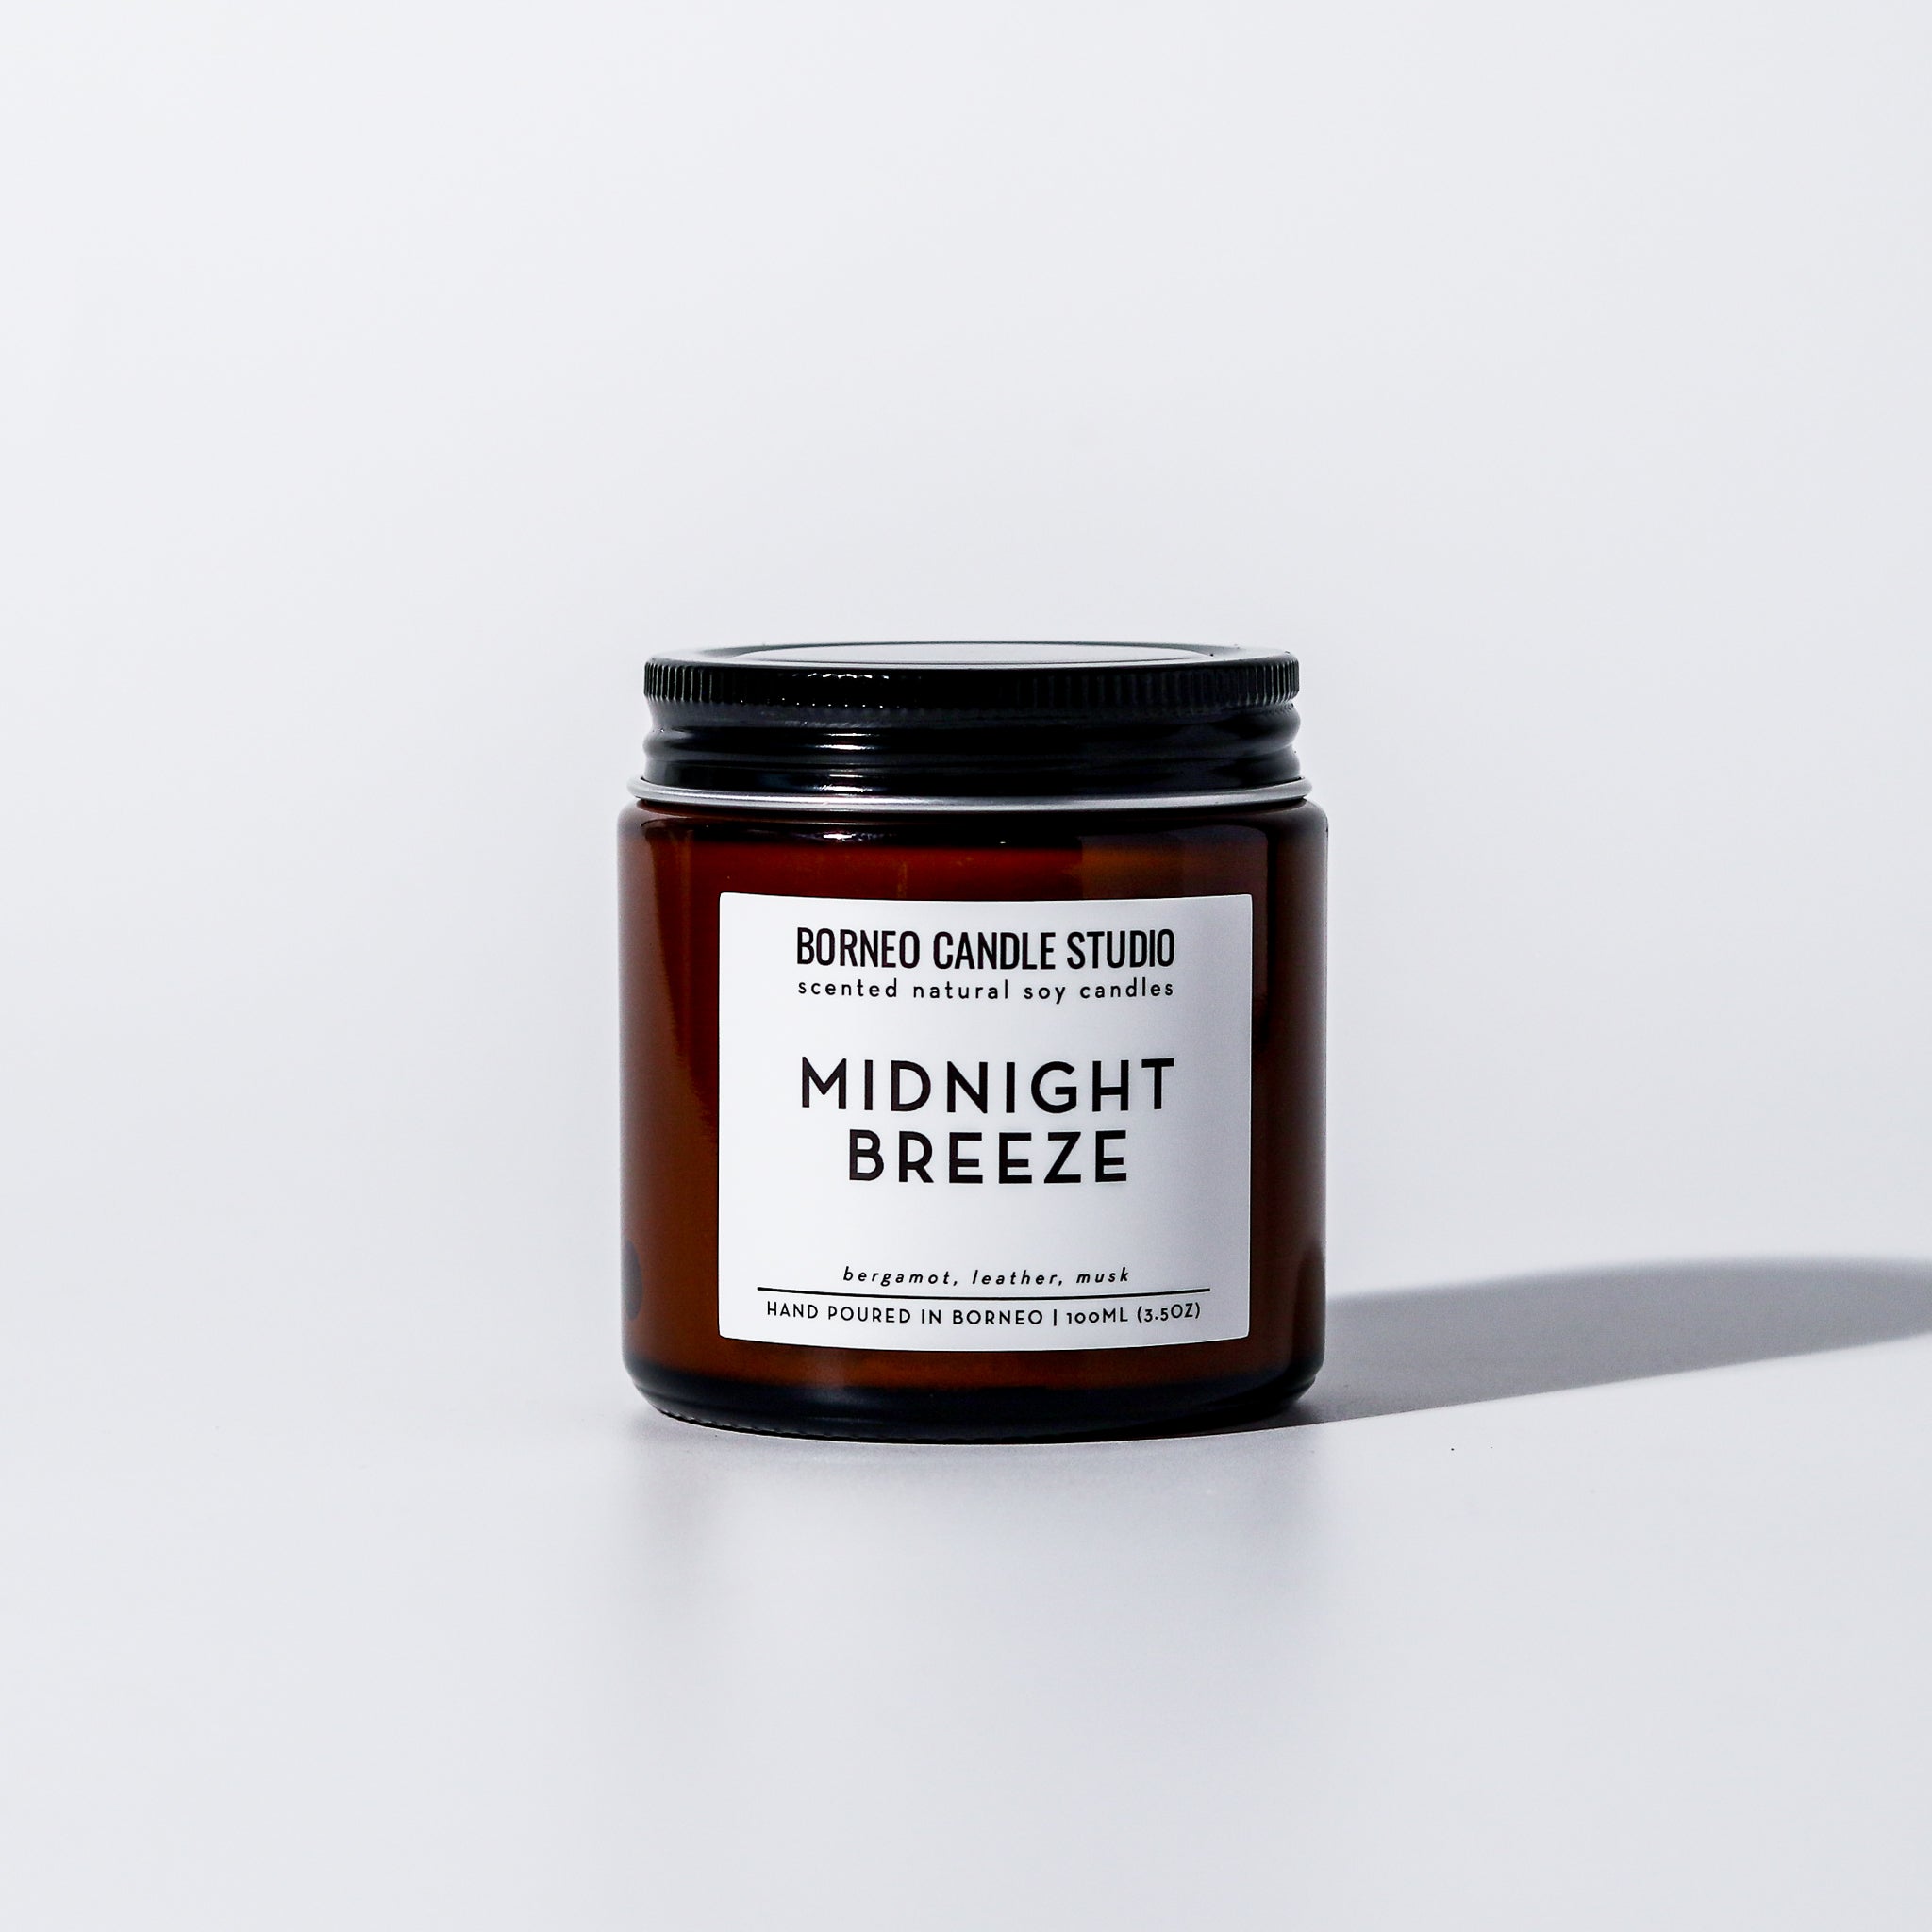 Midnight Breeze Scented Candle - bergamot, leather, musk masculine soy candle